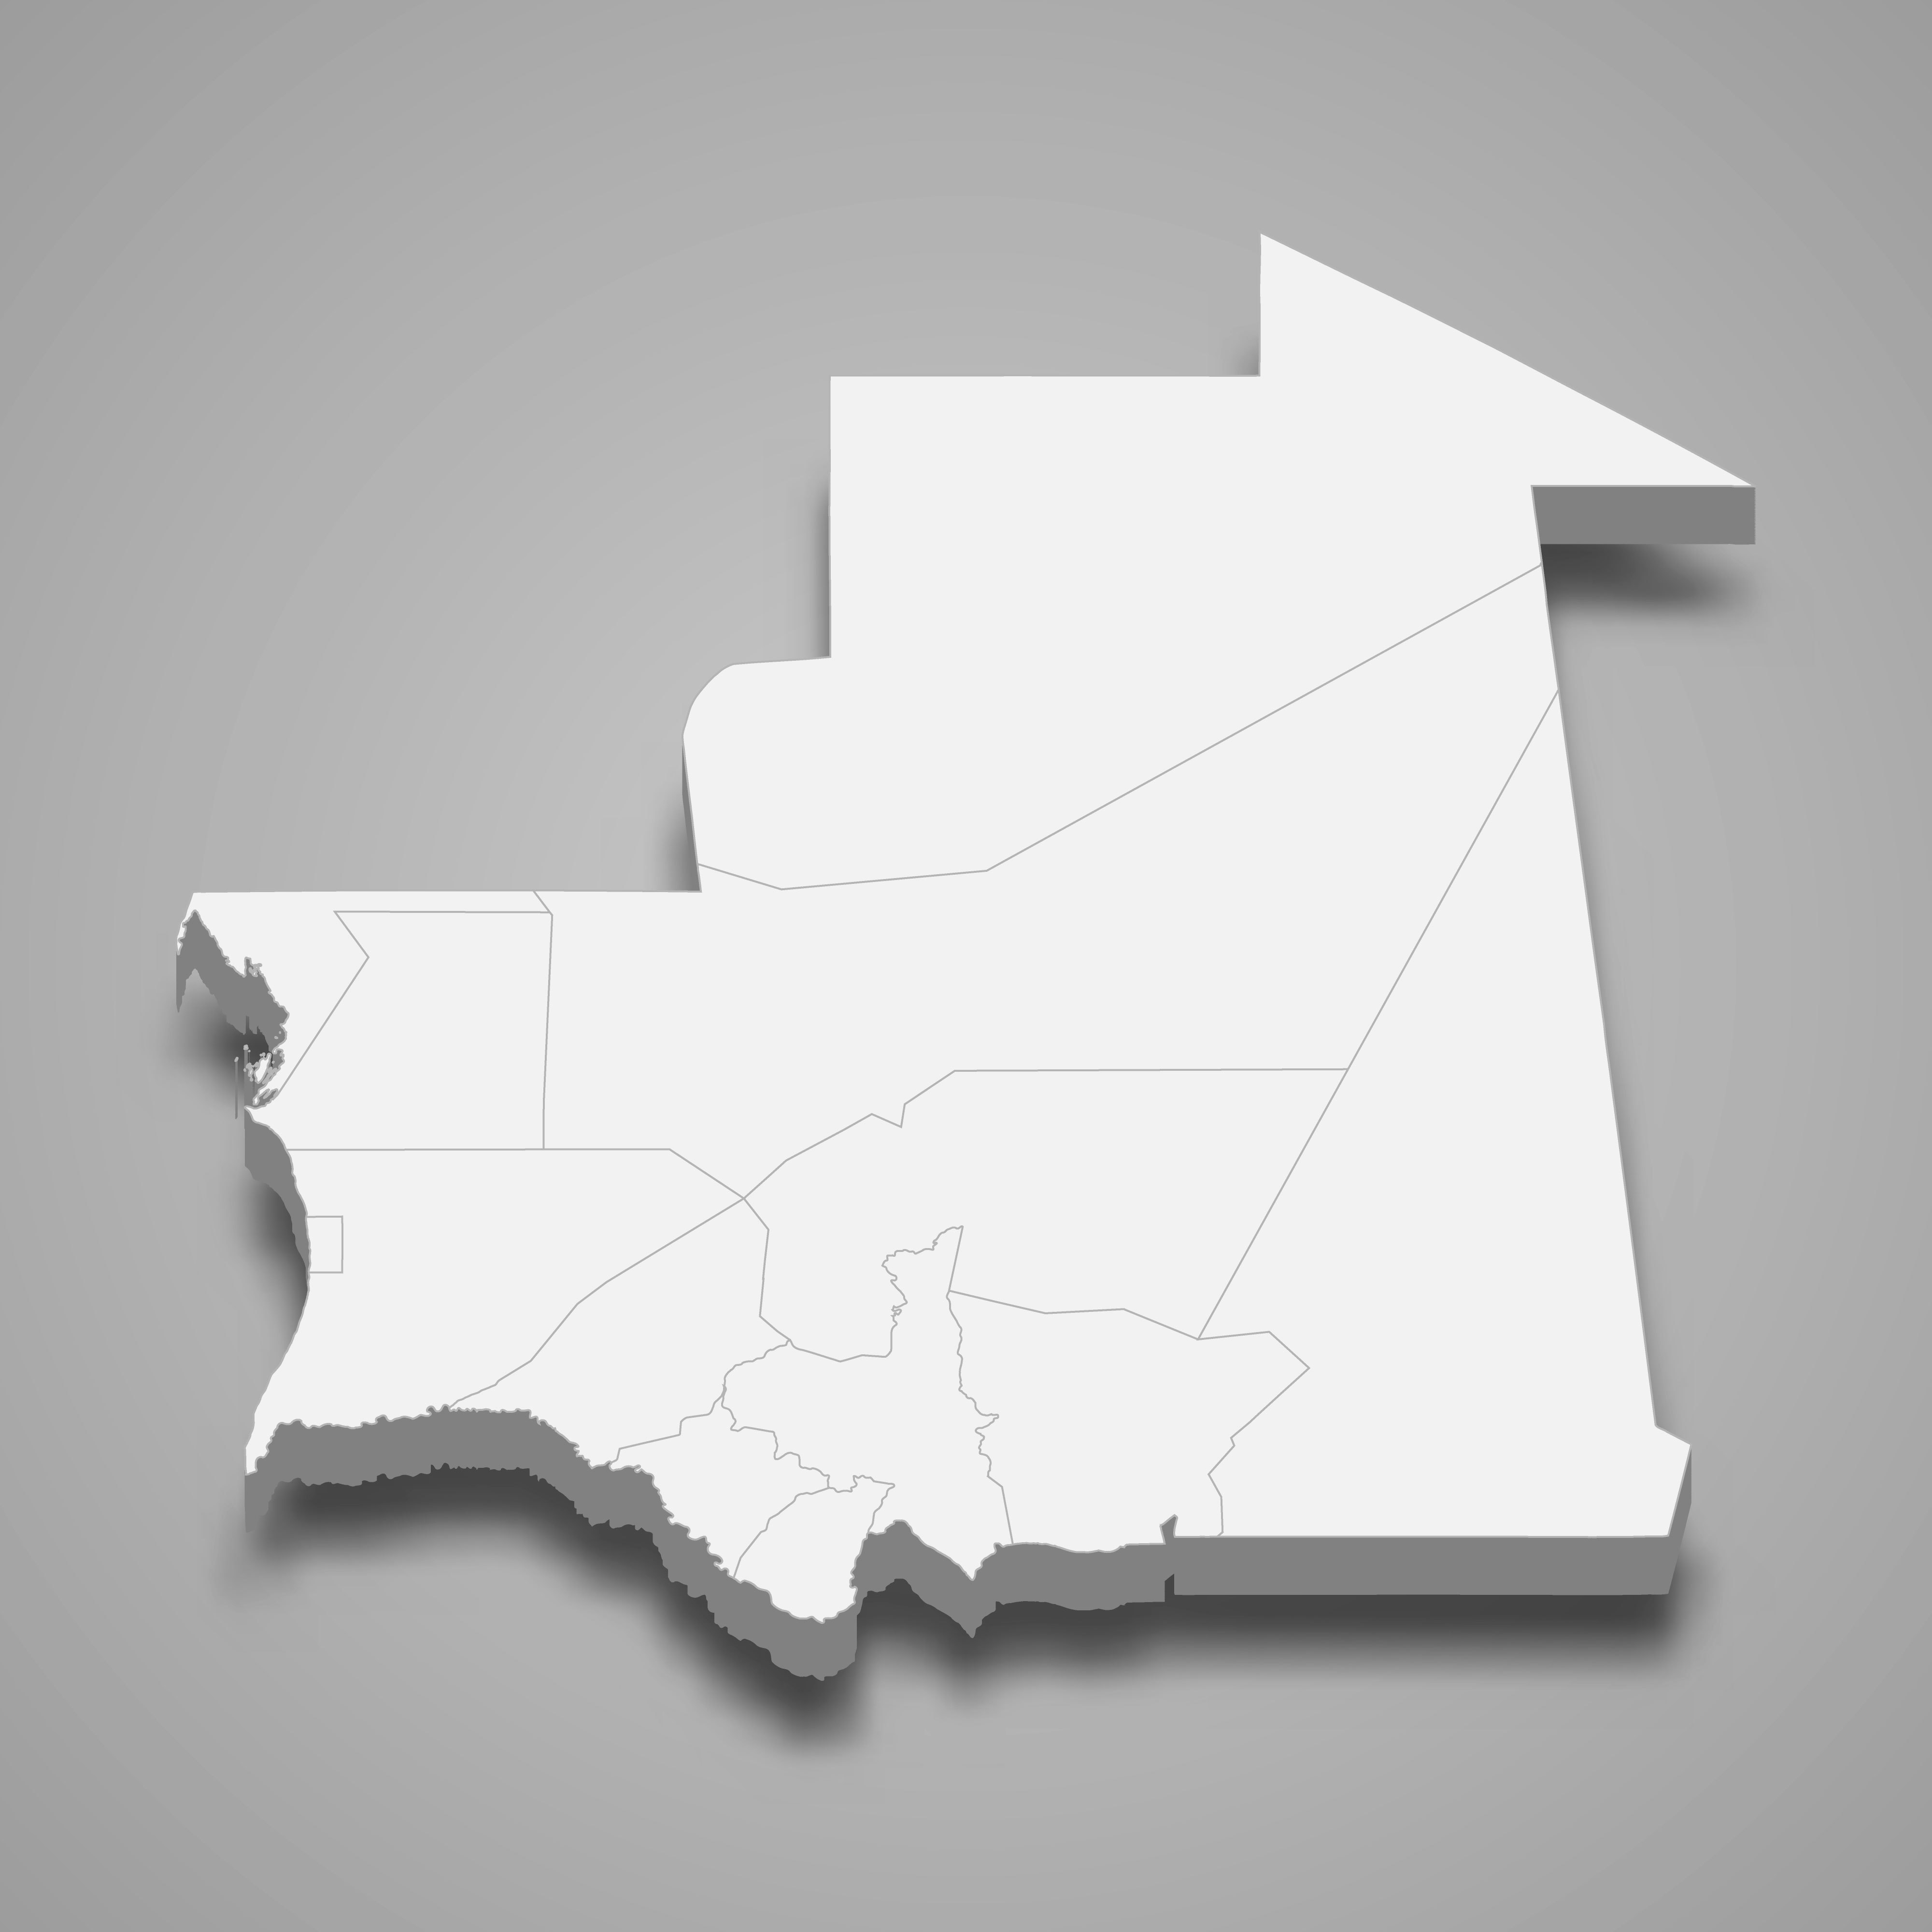 3d map of Mauritania with borders of regions. 3d map with borders of regions Template for your design